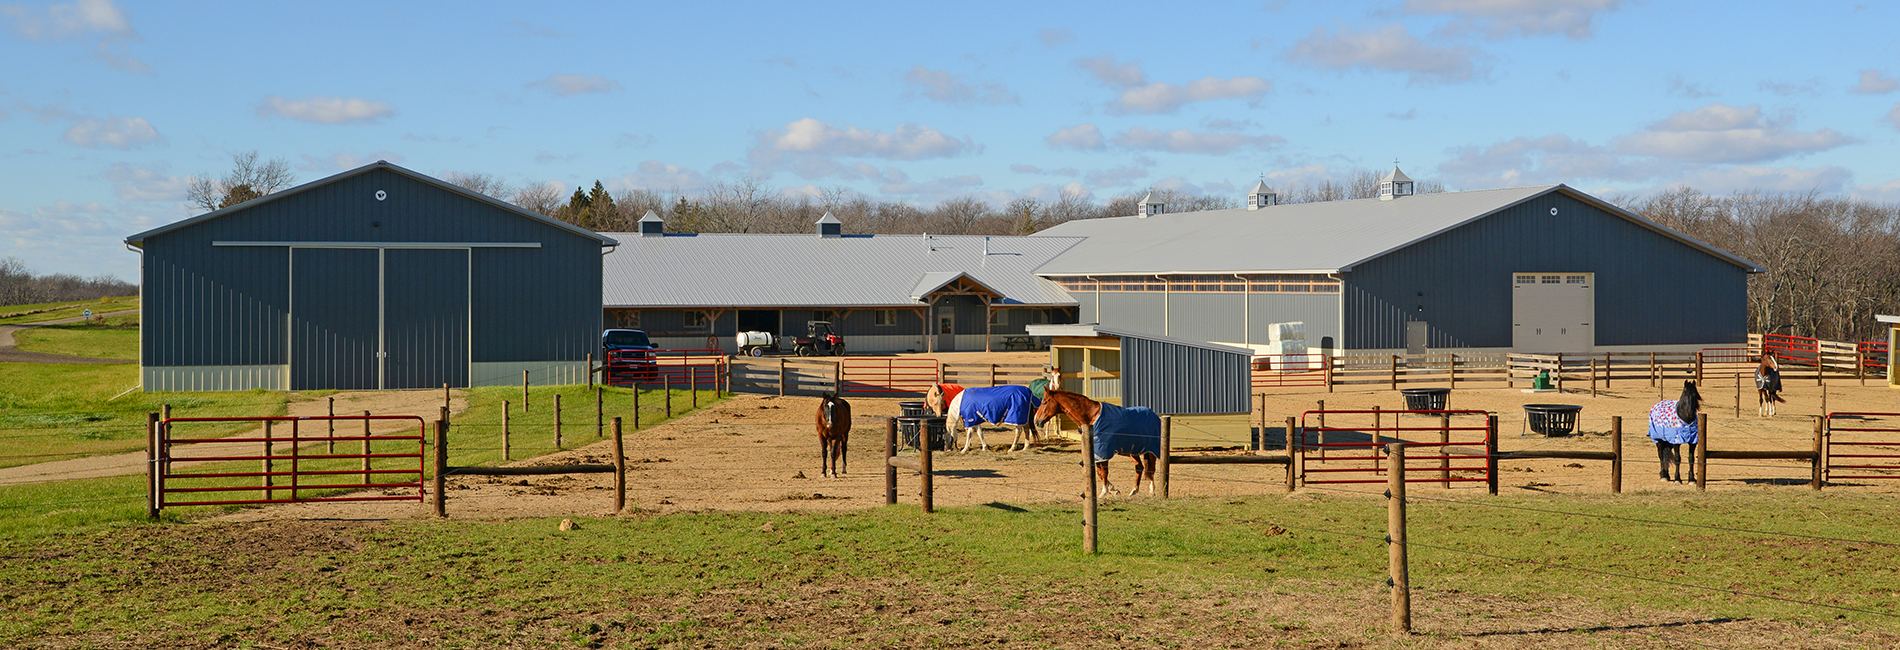 Horse Barns, Riding Arenas and Stables